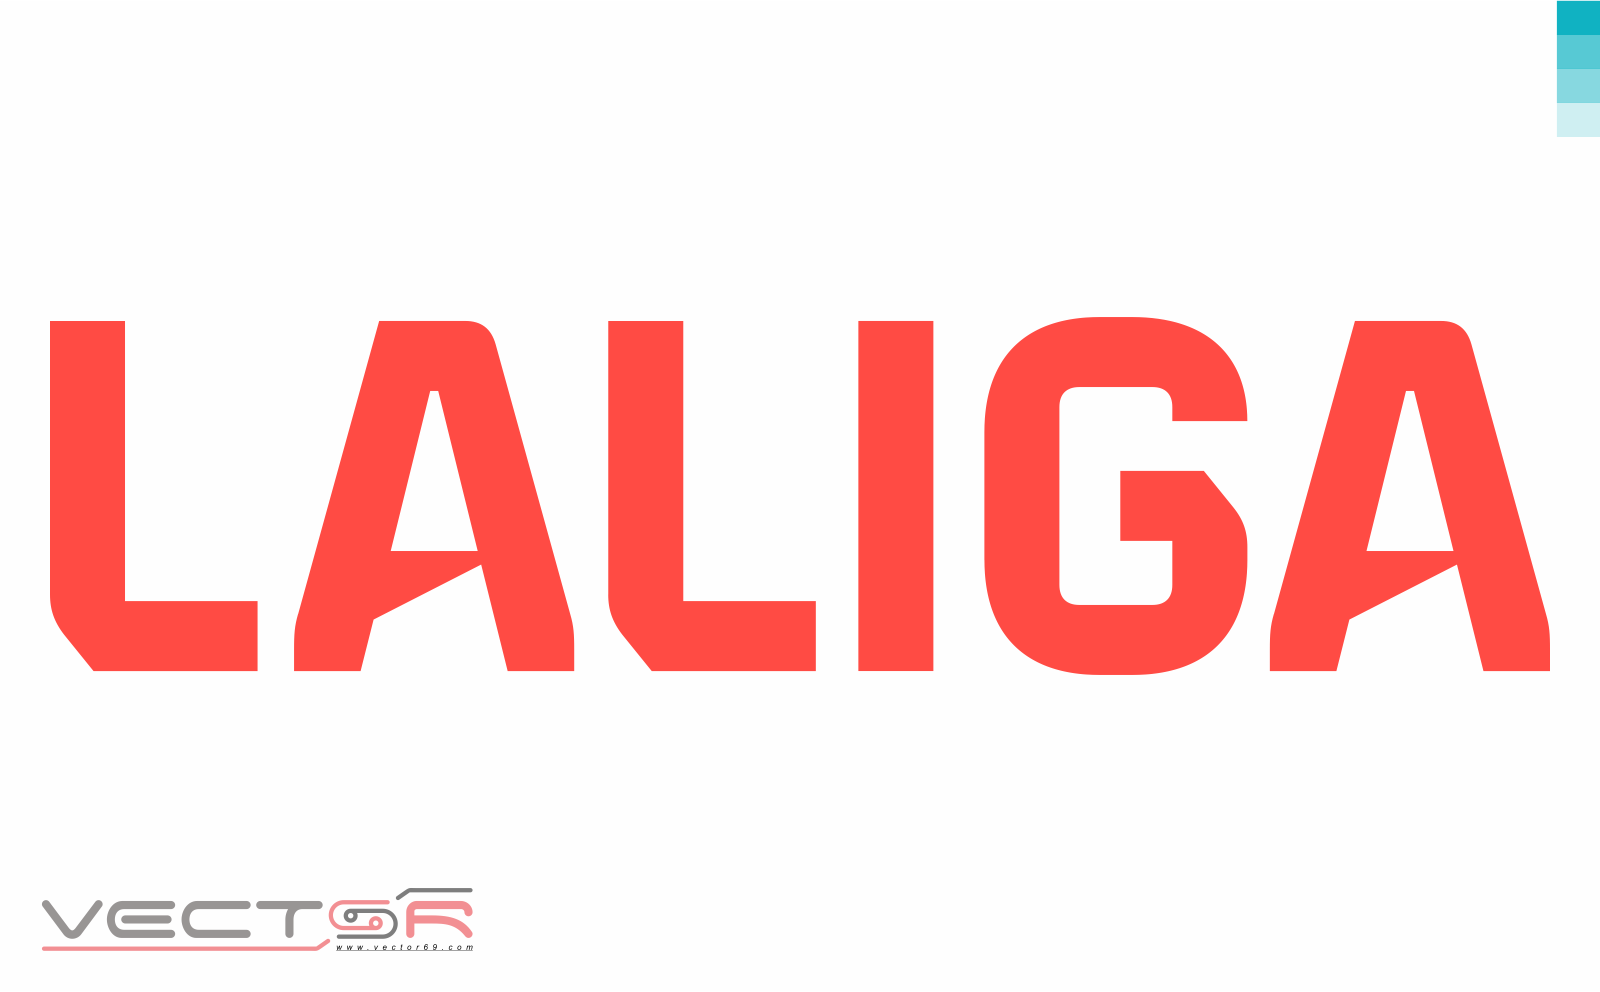 LaLiga Logo - Download Vector File SVG (Scalable Vector Graphics)